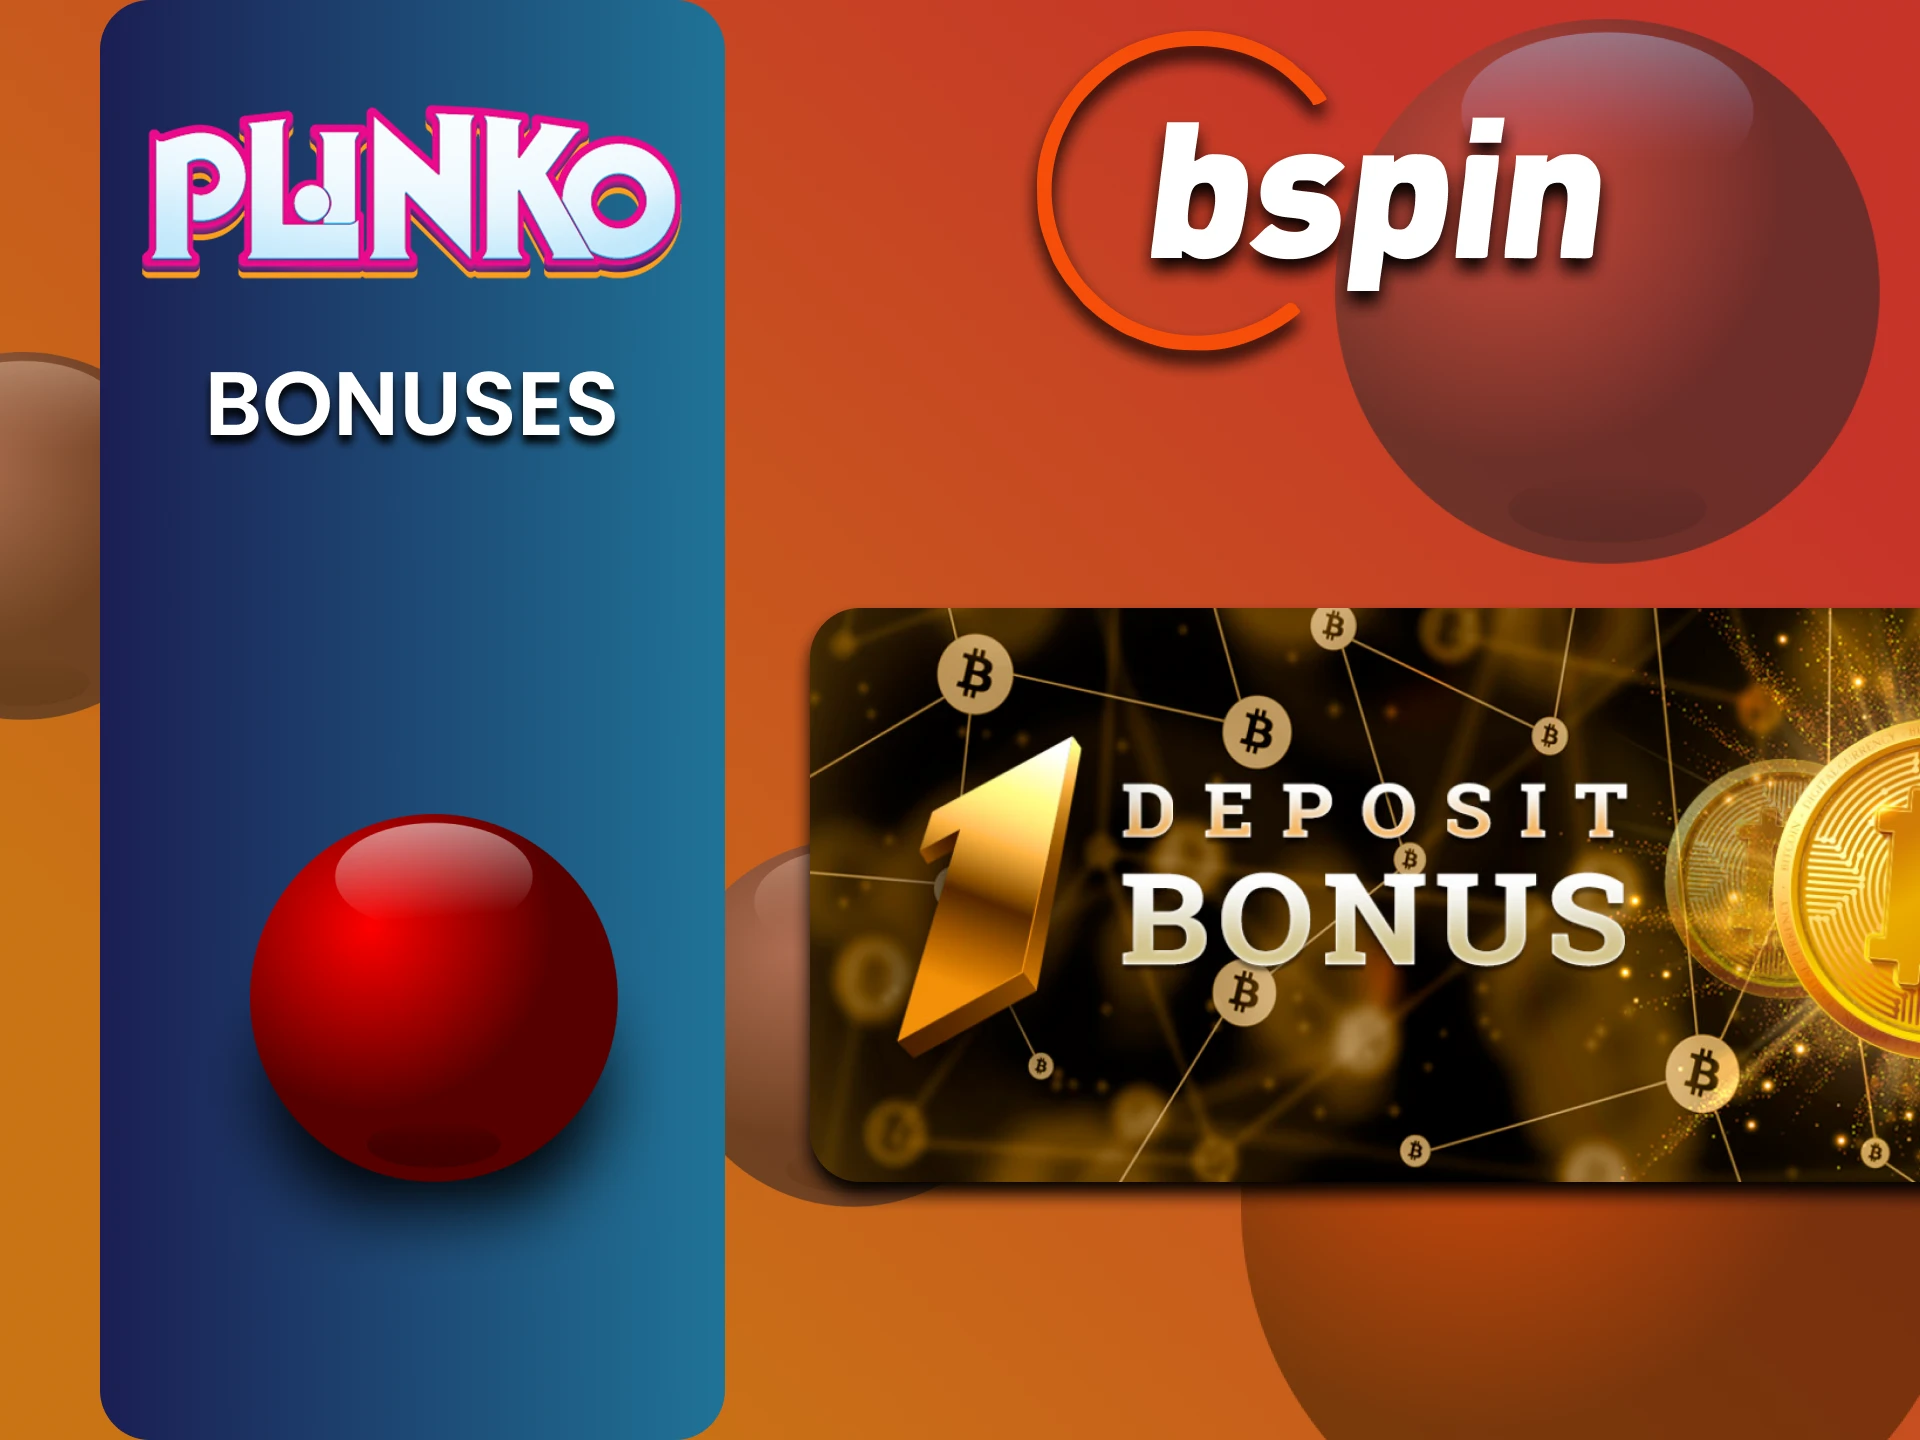 Get bonuses for Plinko from Bspin.